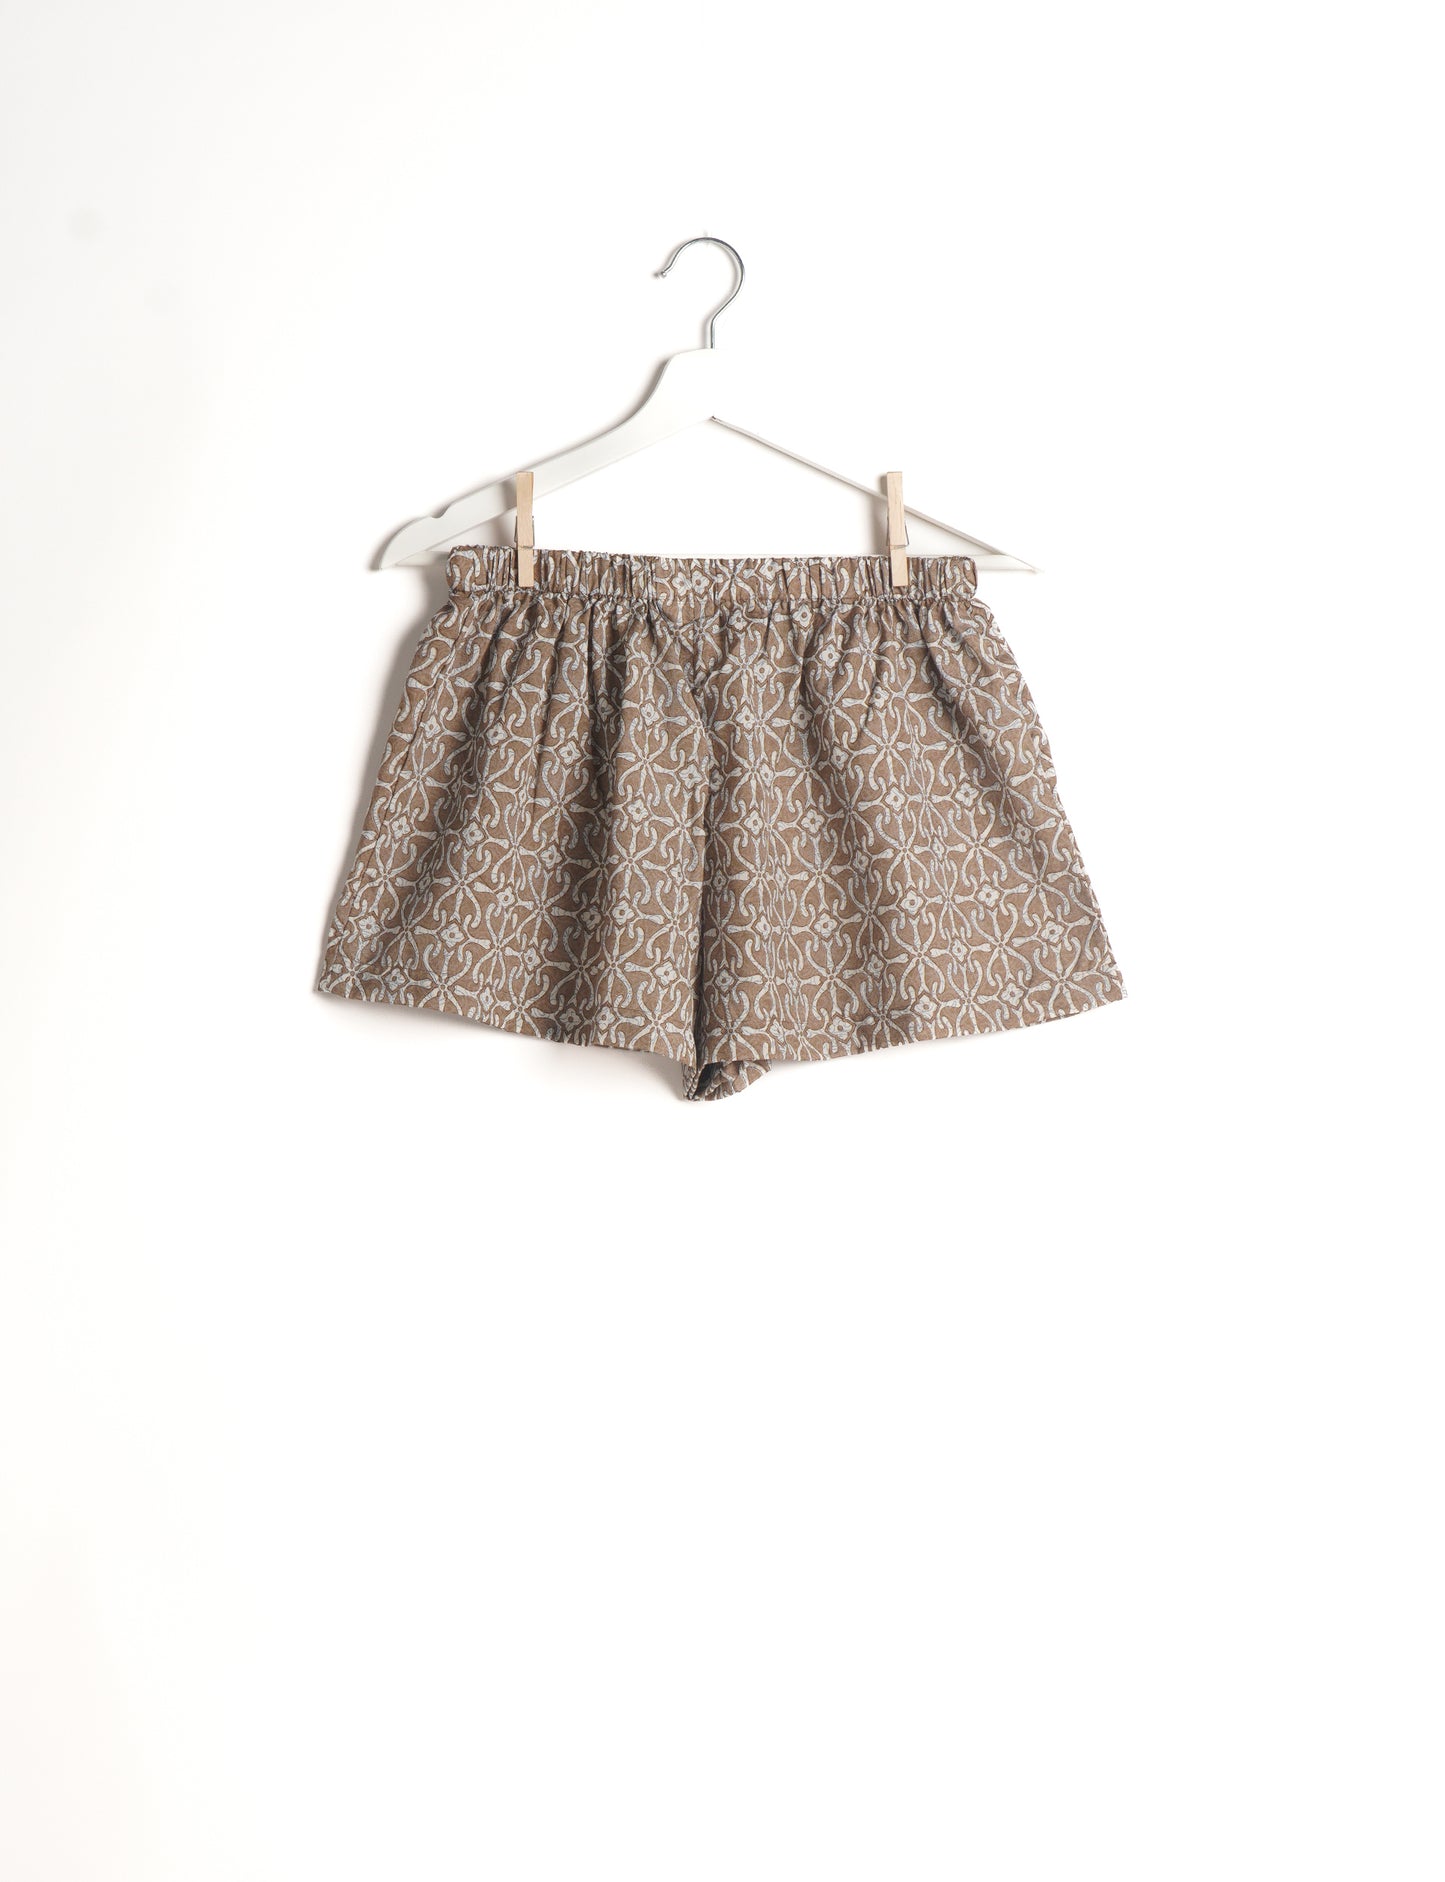 Elevate your wardrobe with our eco-friendly shorts. The all-around elastic waist and drawstring tie provide comfort and style. Crafted with ethical and sustainable practices, these shorts redefine green fashion, making them a perfect addition to your conscious clothing collection.